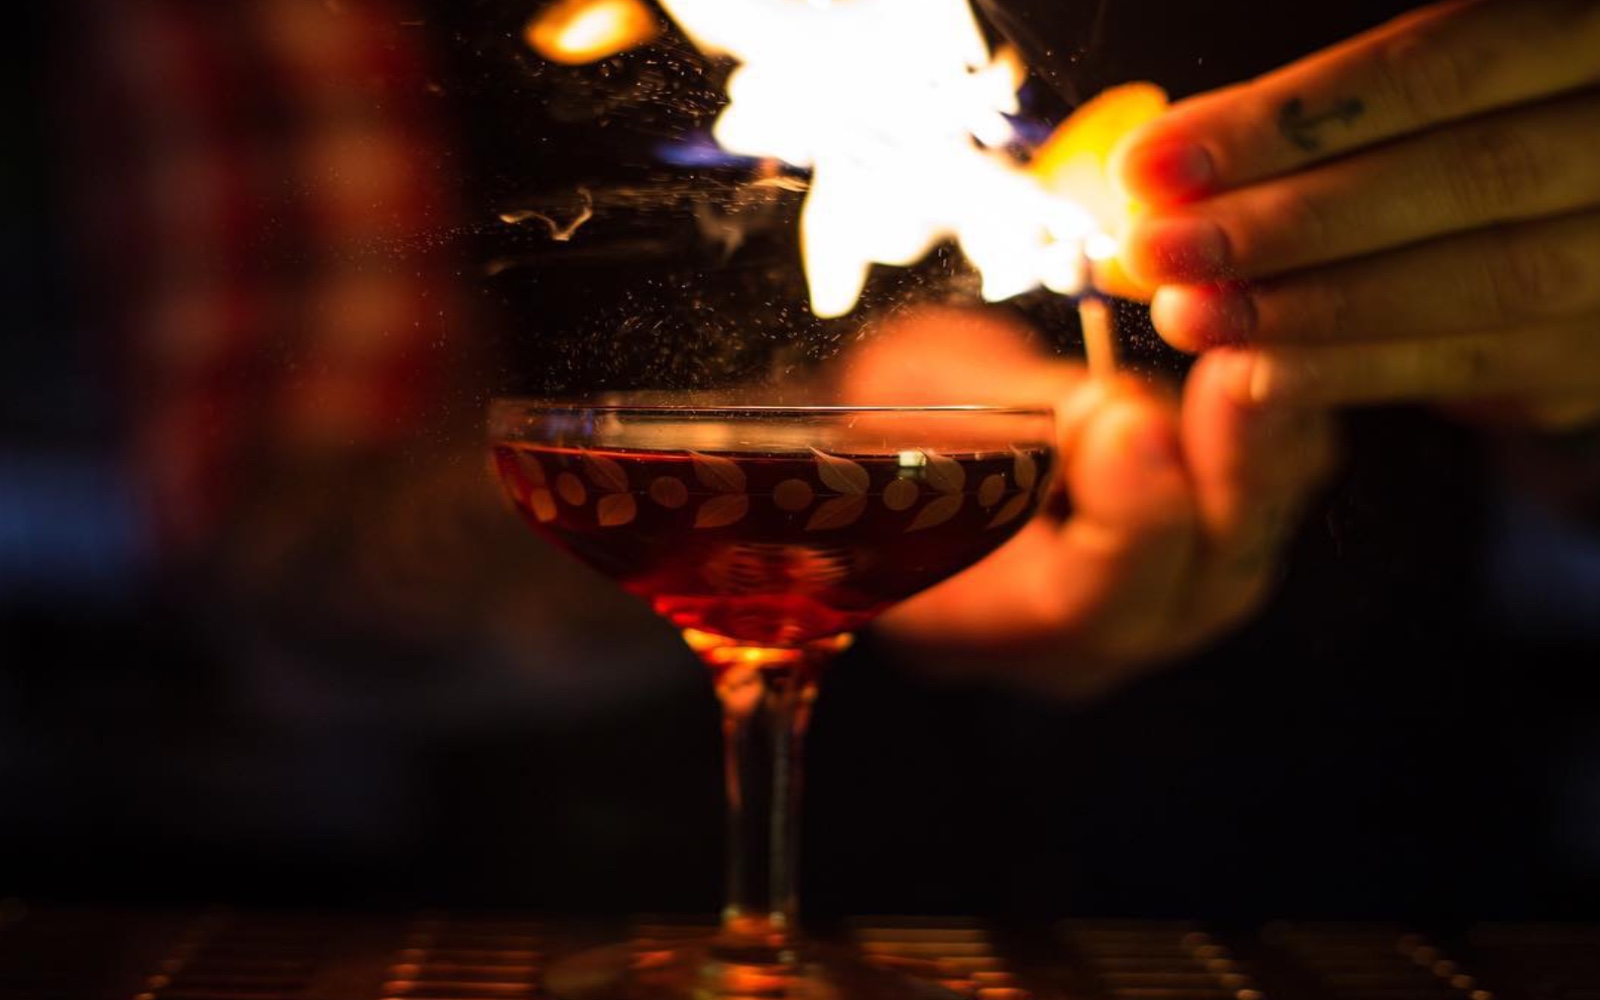 Fire alight above cocktail at the Keefer Bar, Vancouver